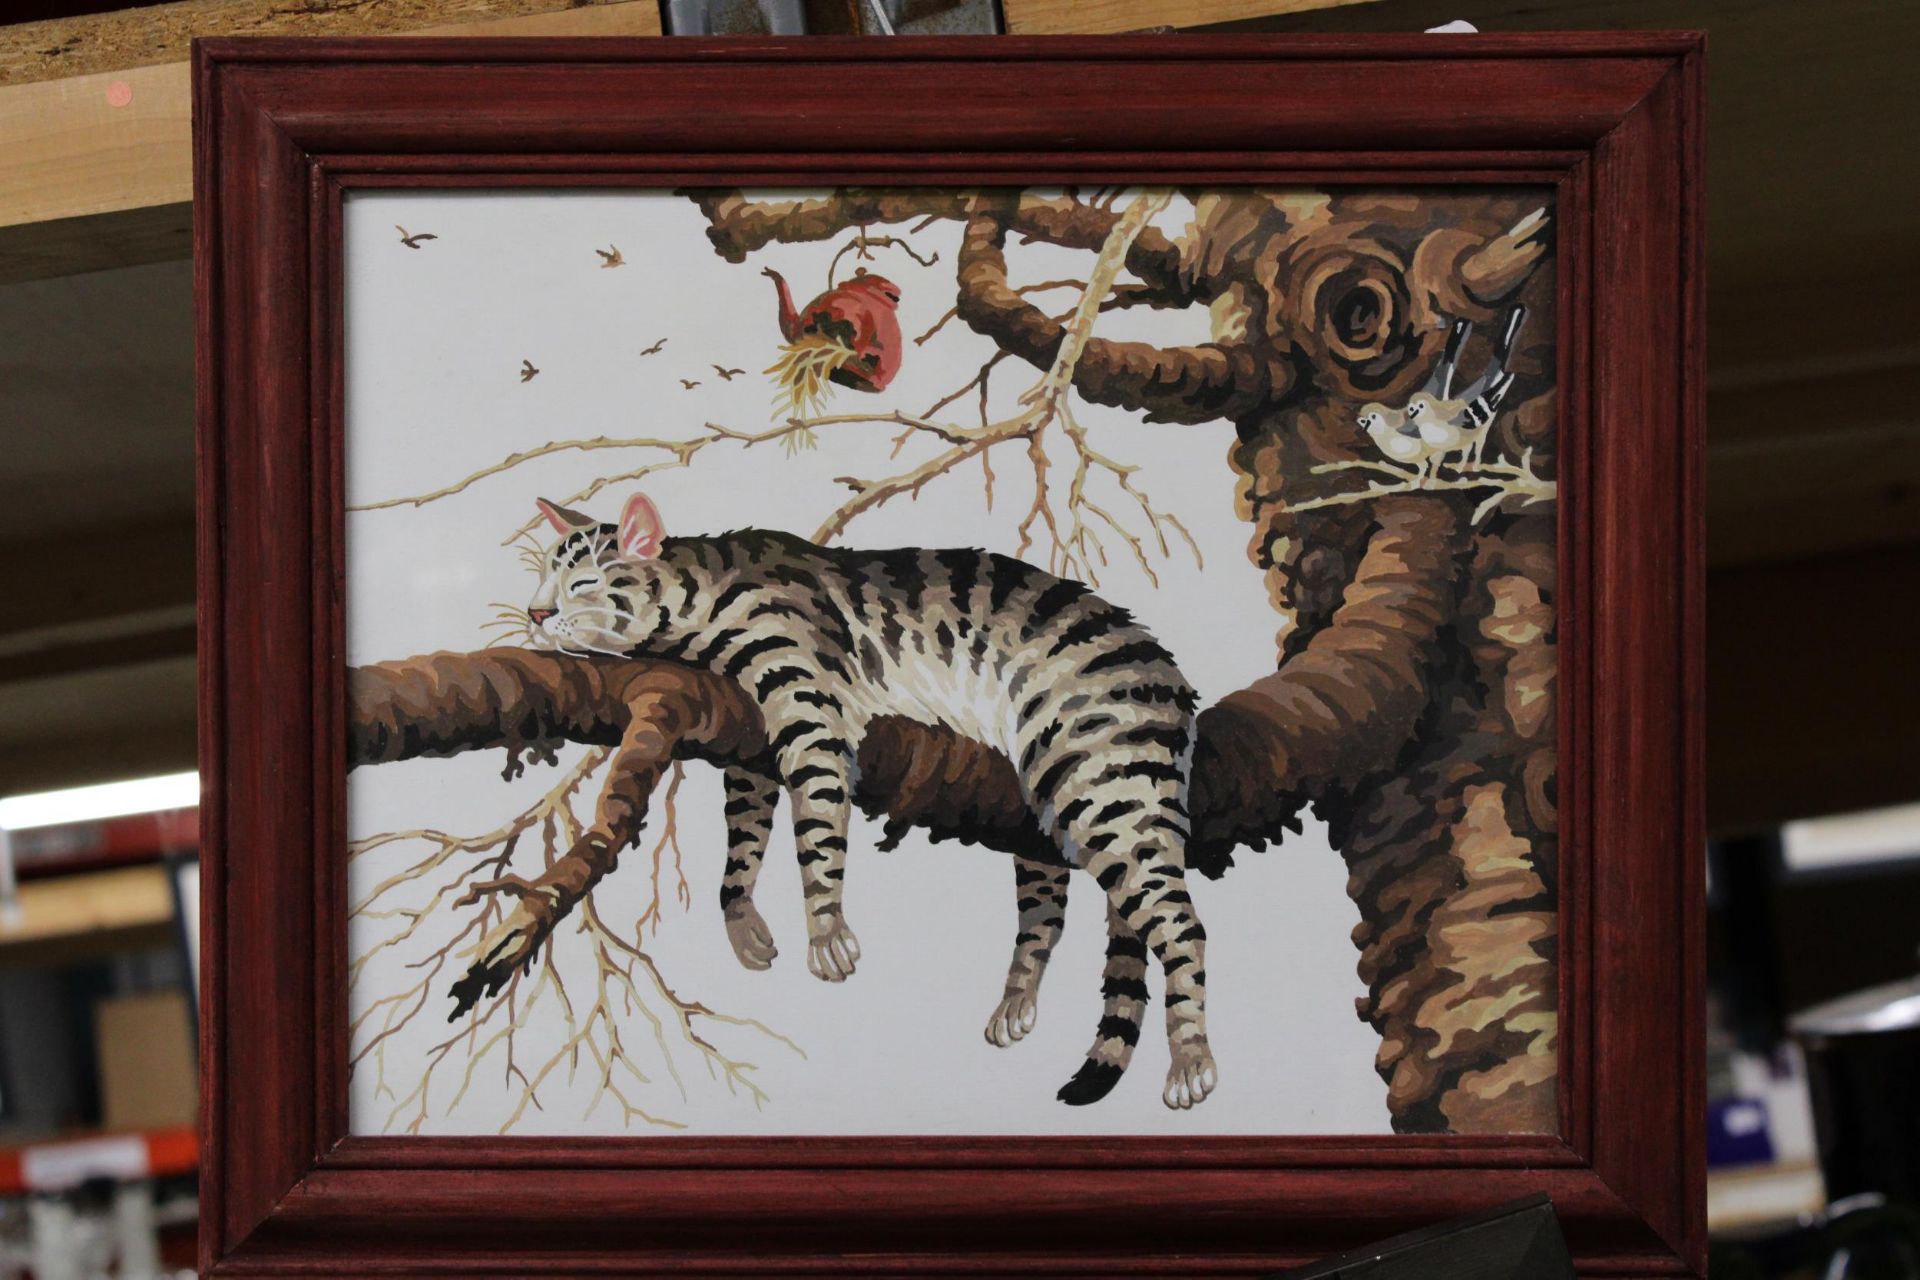 A WATERCOLOUR OF A TABBY CAT IN A TREE PLUS A PRINT OF A CAT, 'WORRYING THE GOLDFISH' - Image 3 of 6